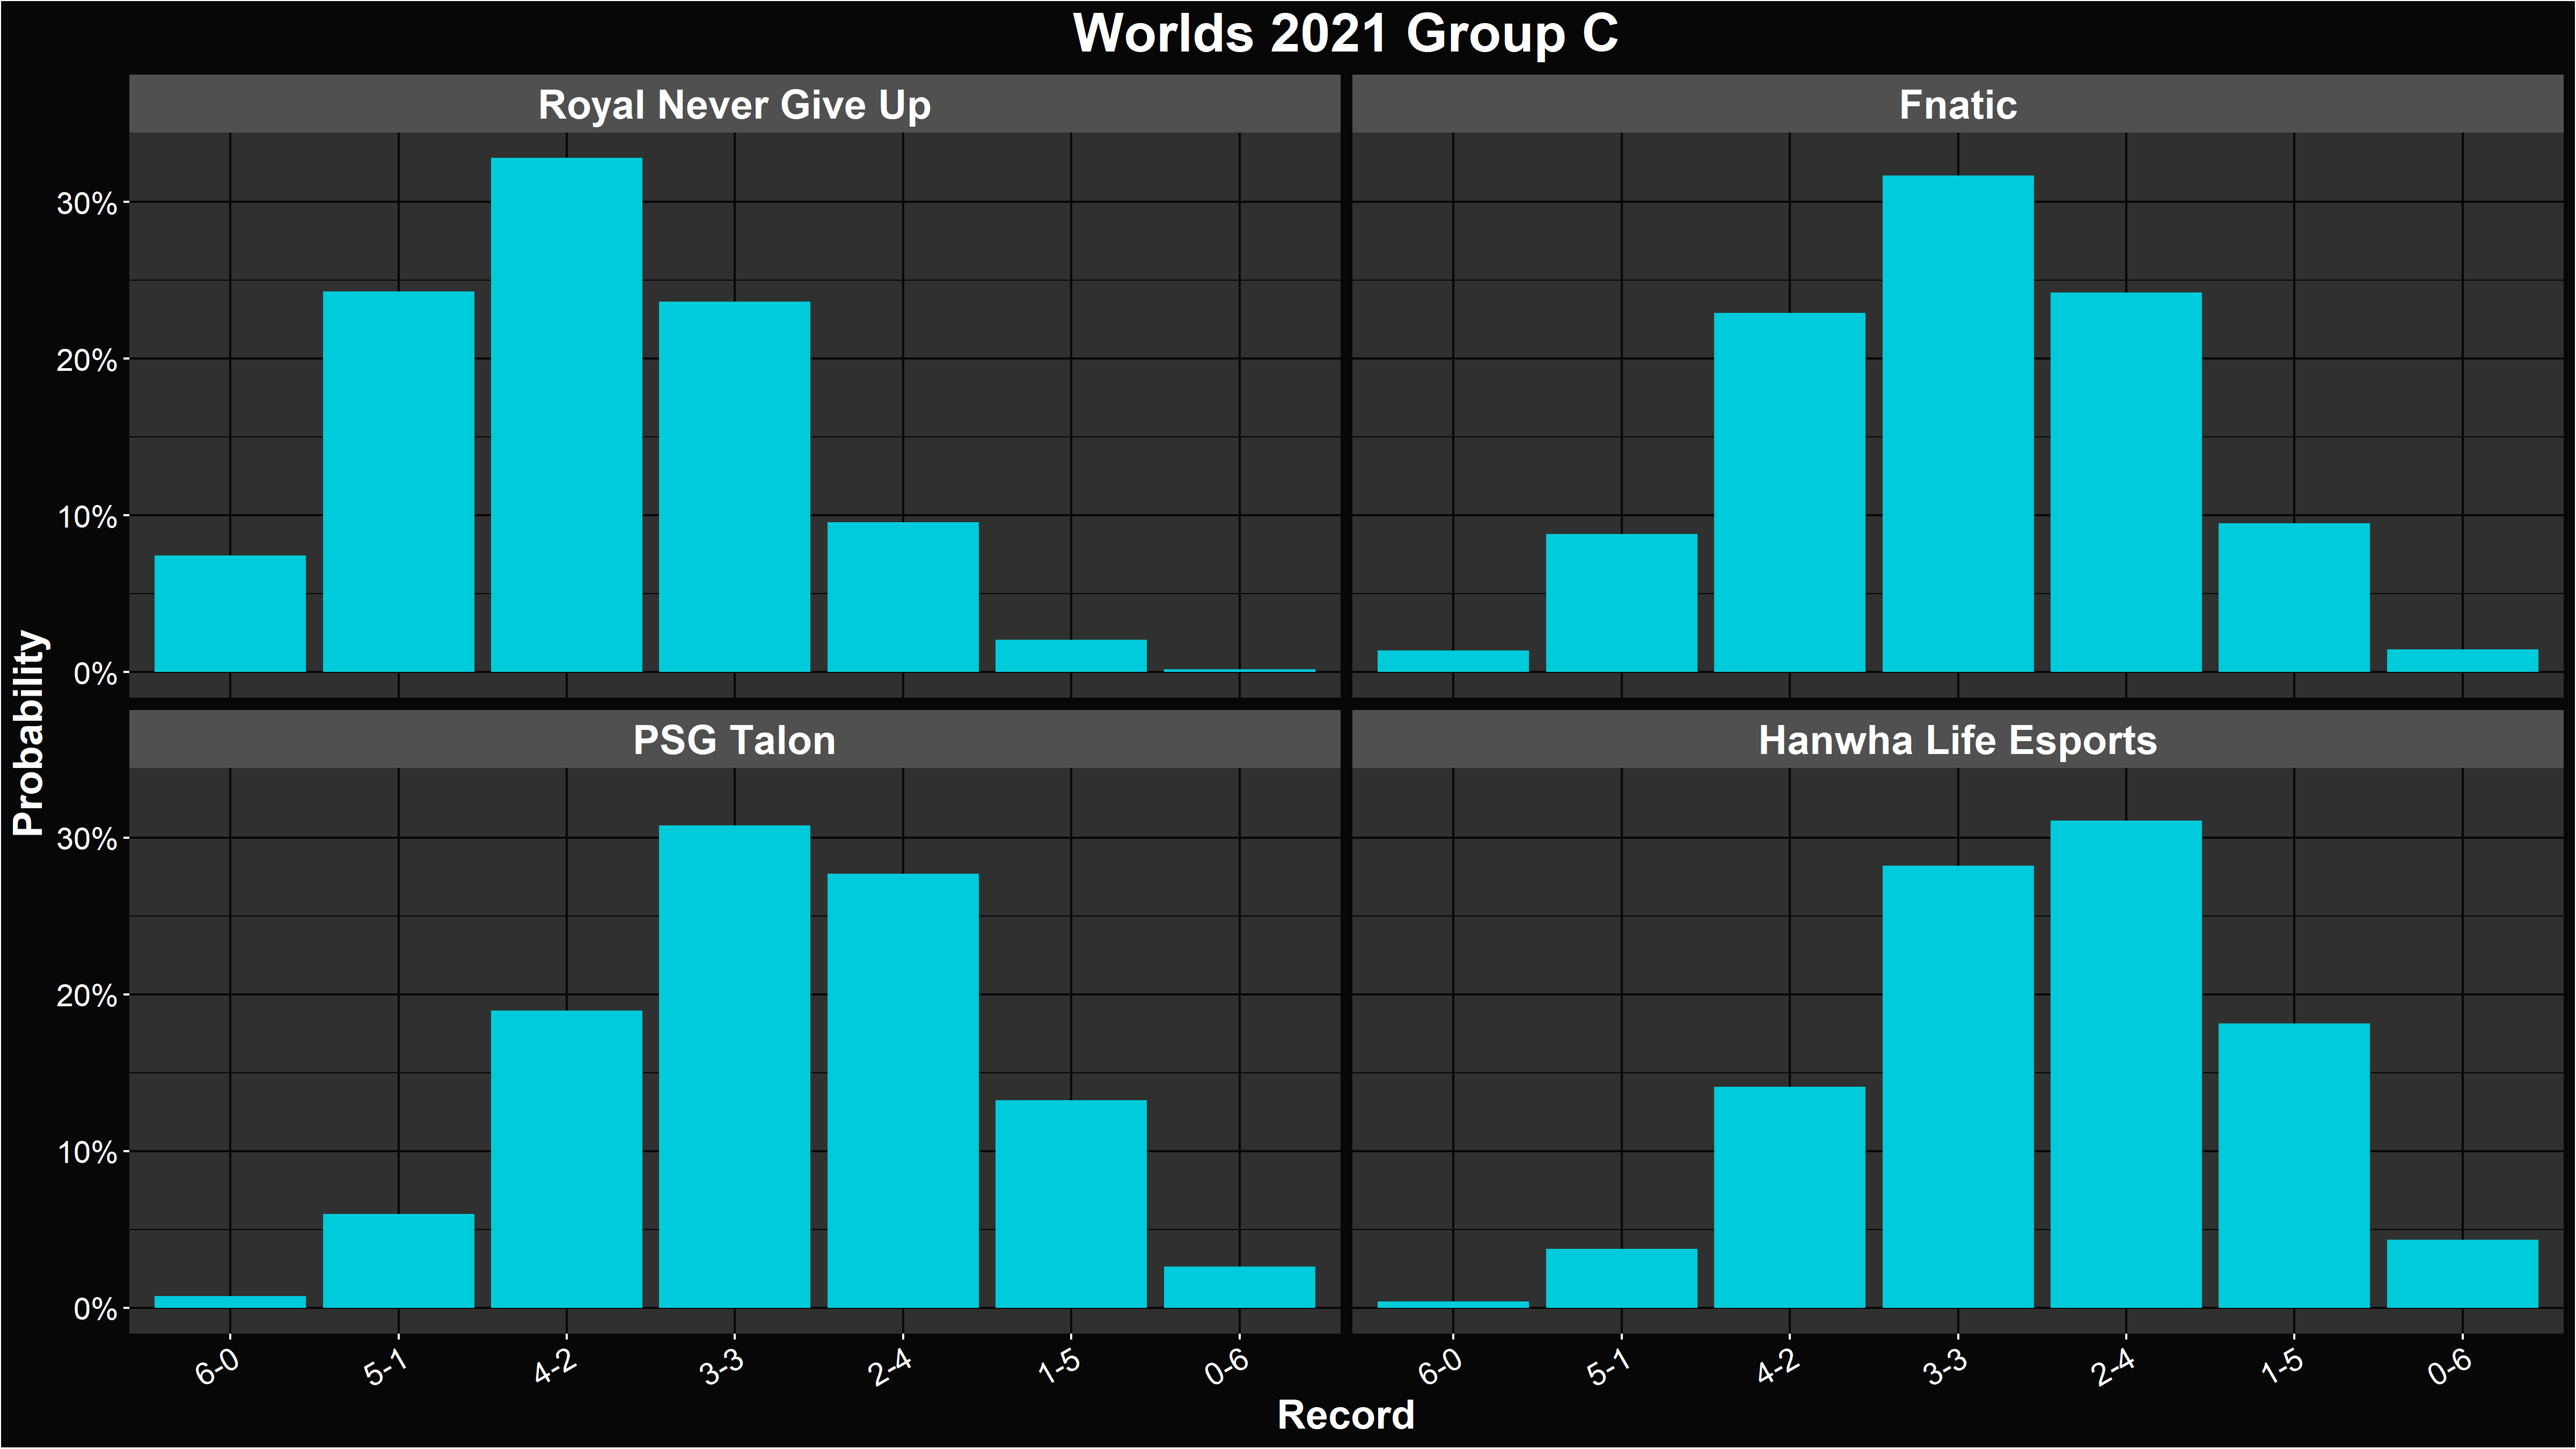 Alacrity's LoL Worlds 2021 Group C Record Distributions